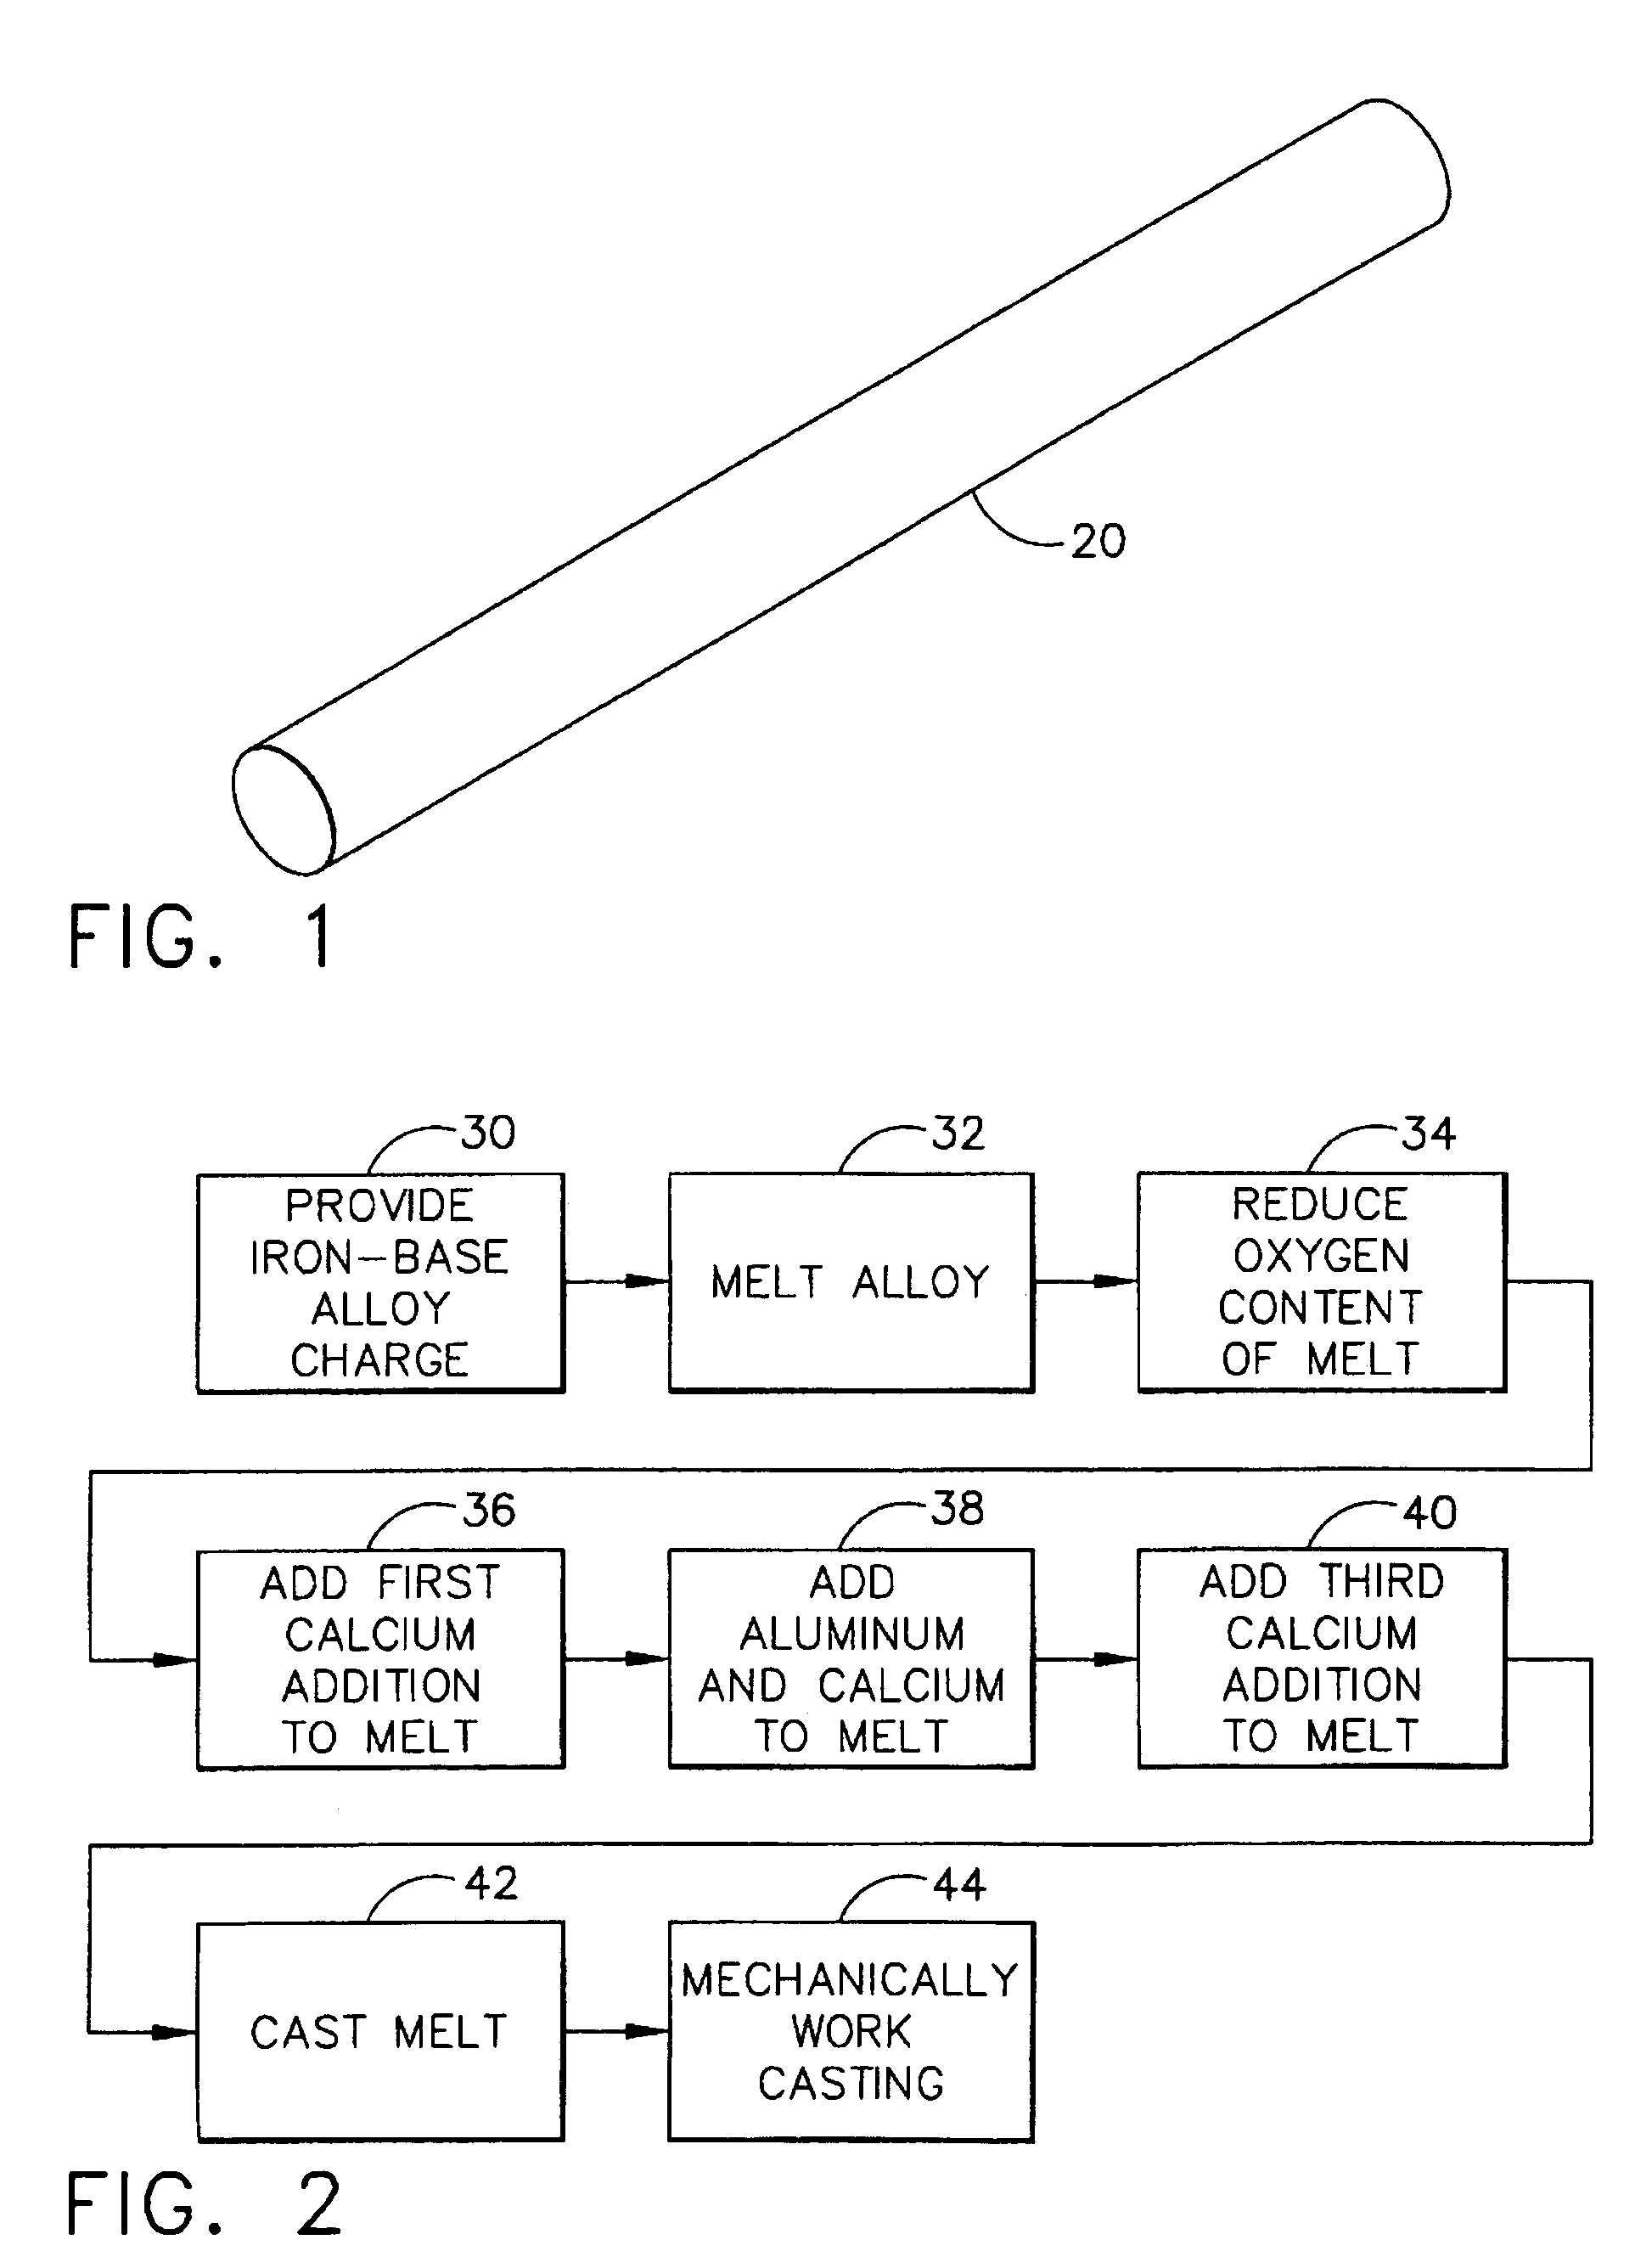 Fabrication of a high-strength steel article with inclusion control during melting